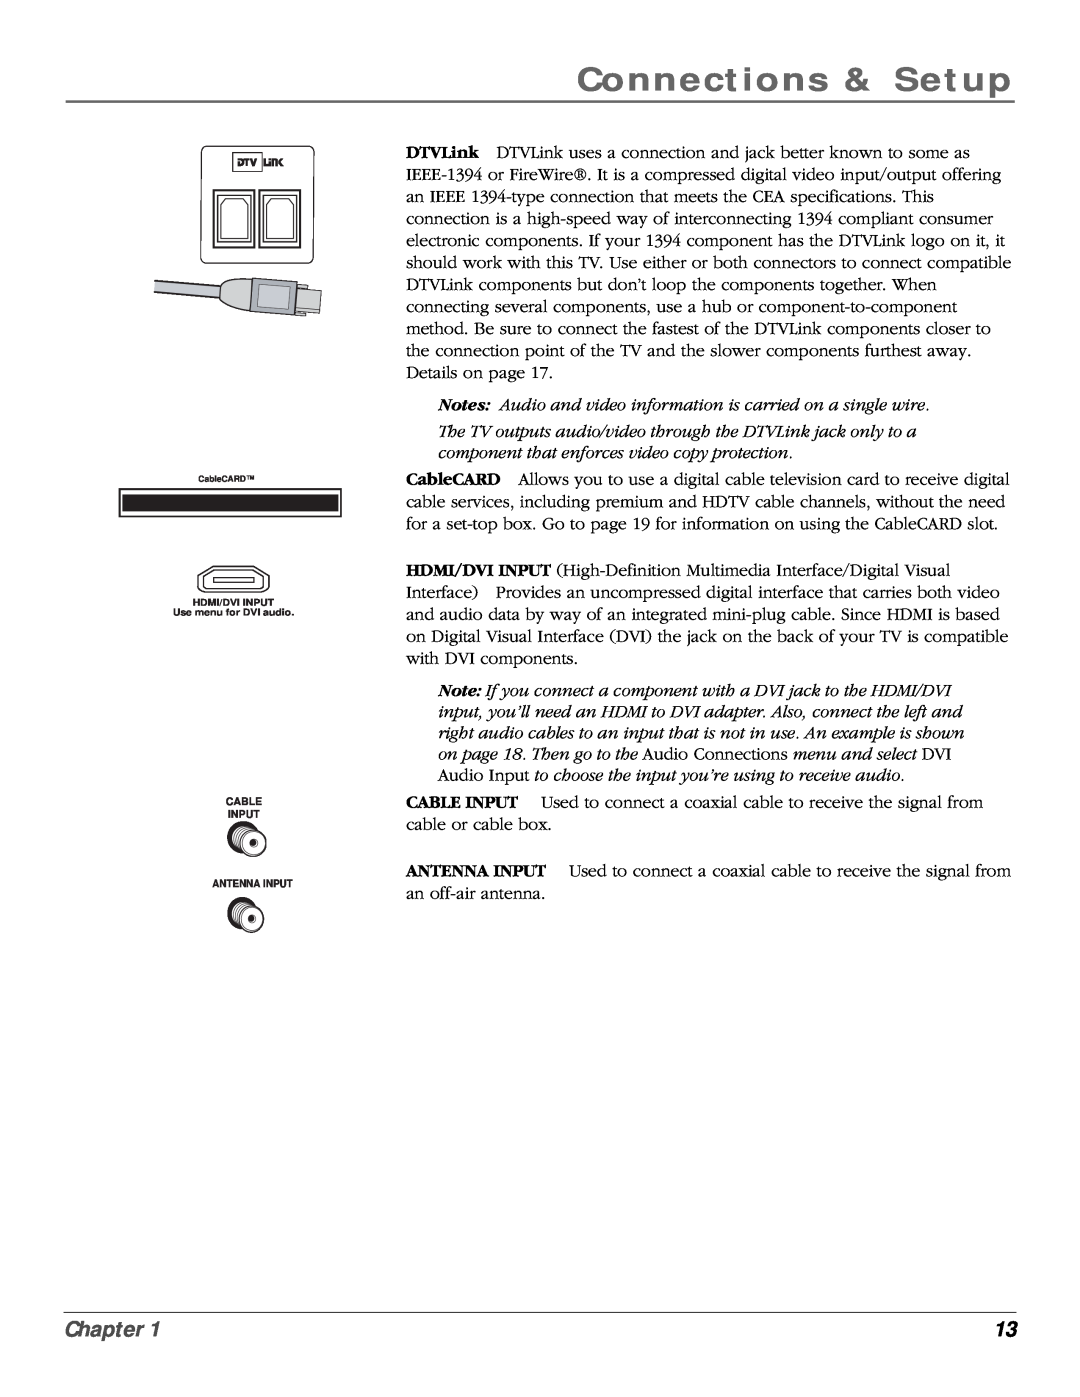 RCA scenium manual Connections & Setup, Chapter, Notes Audio and video information is carried on a single wire 